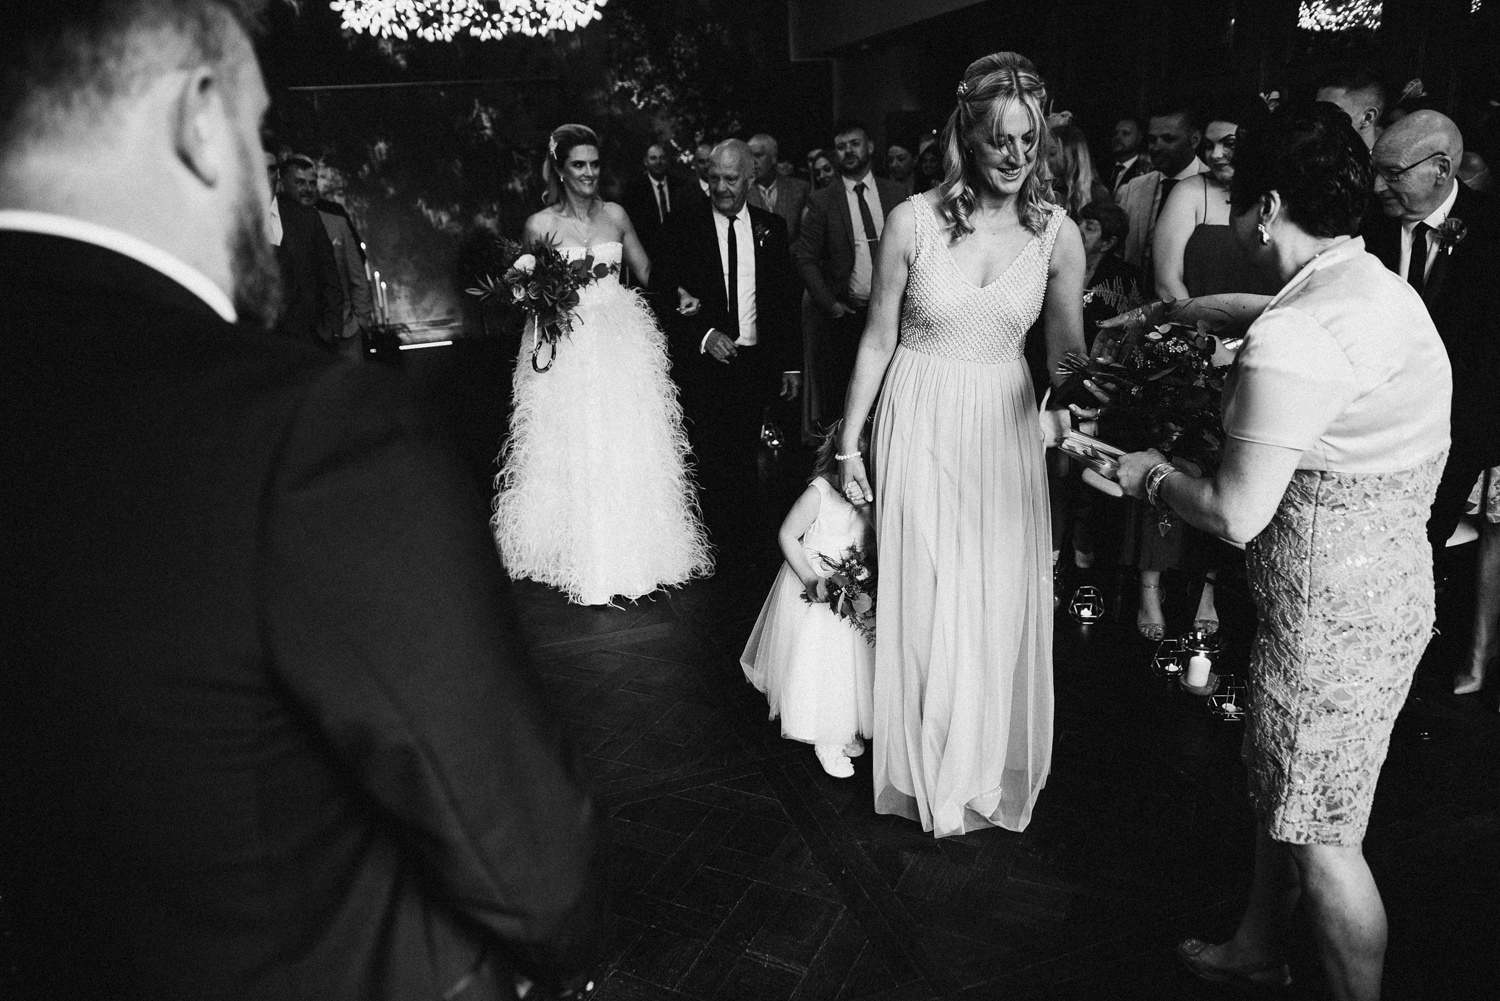 Bride making her way down the aisle